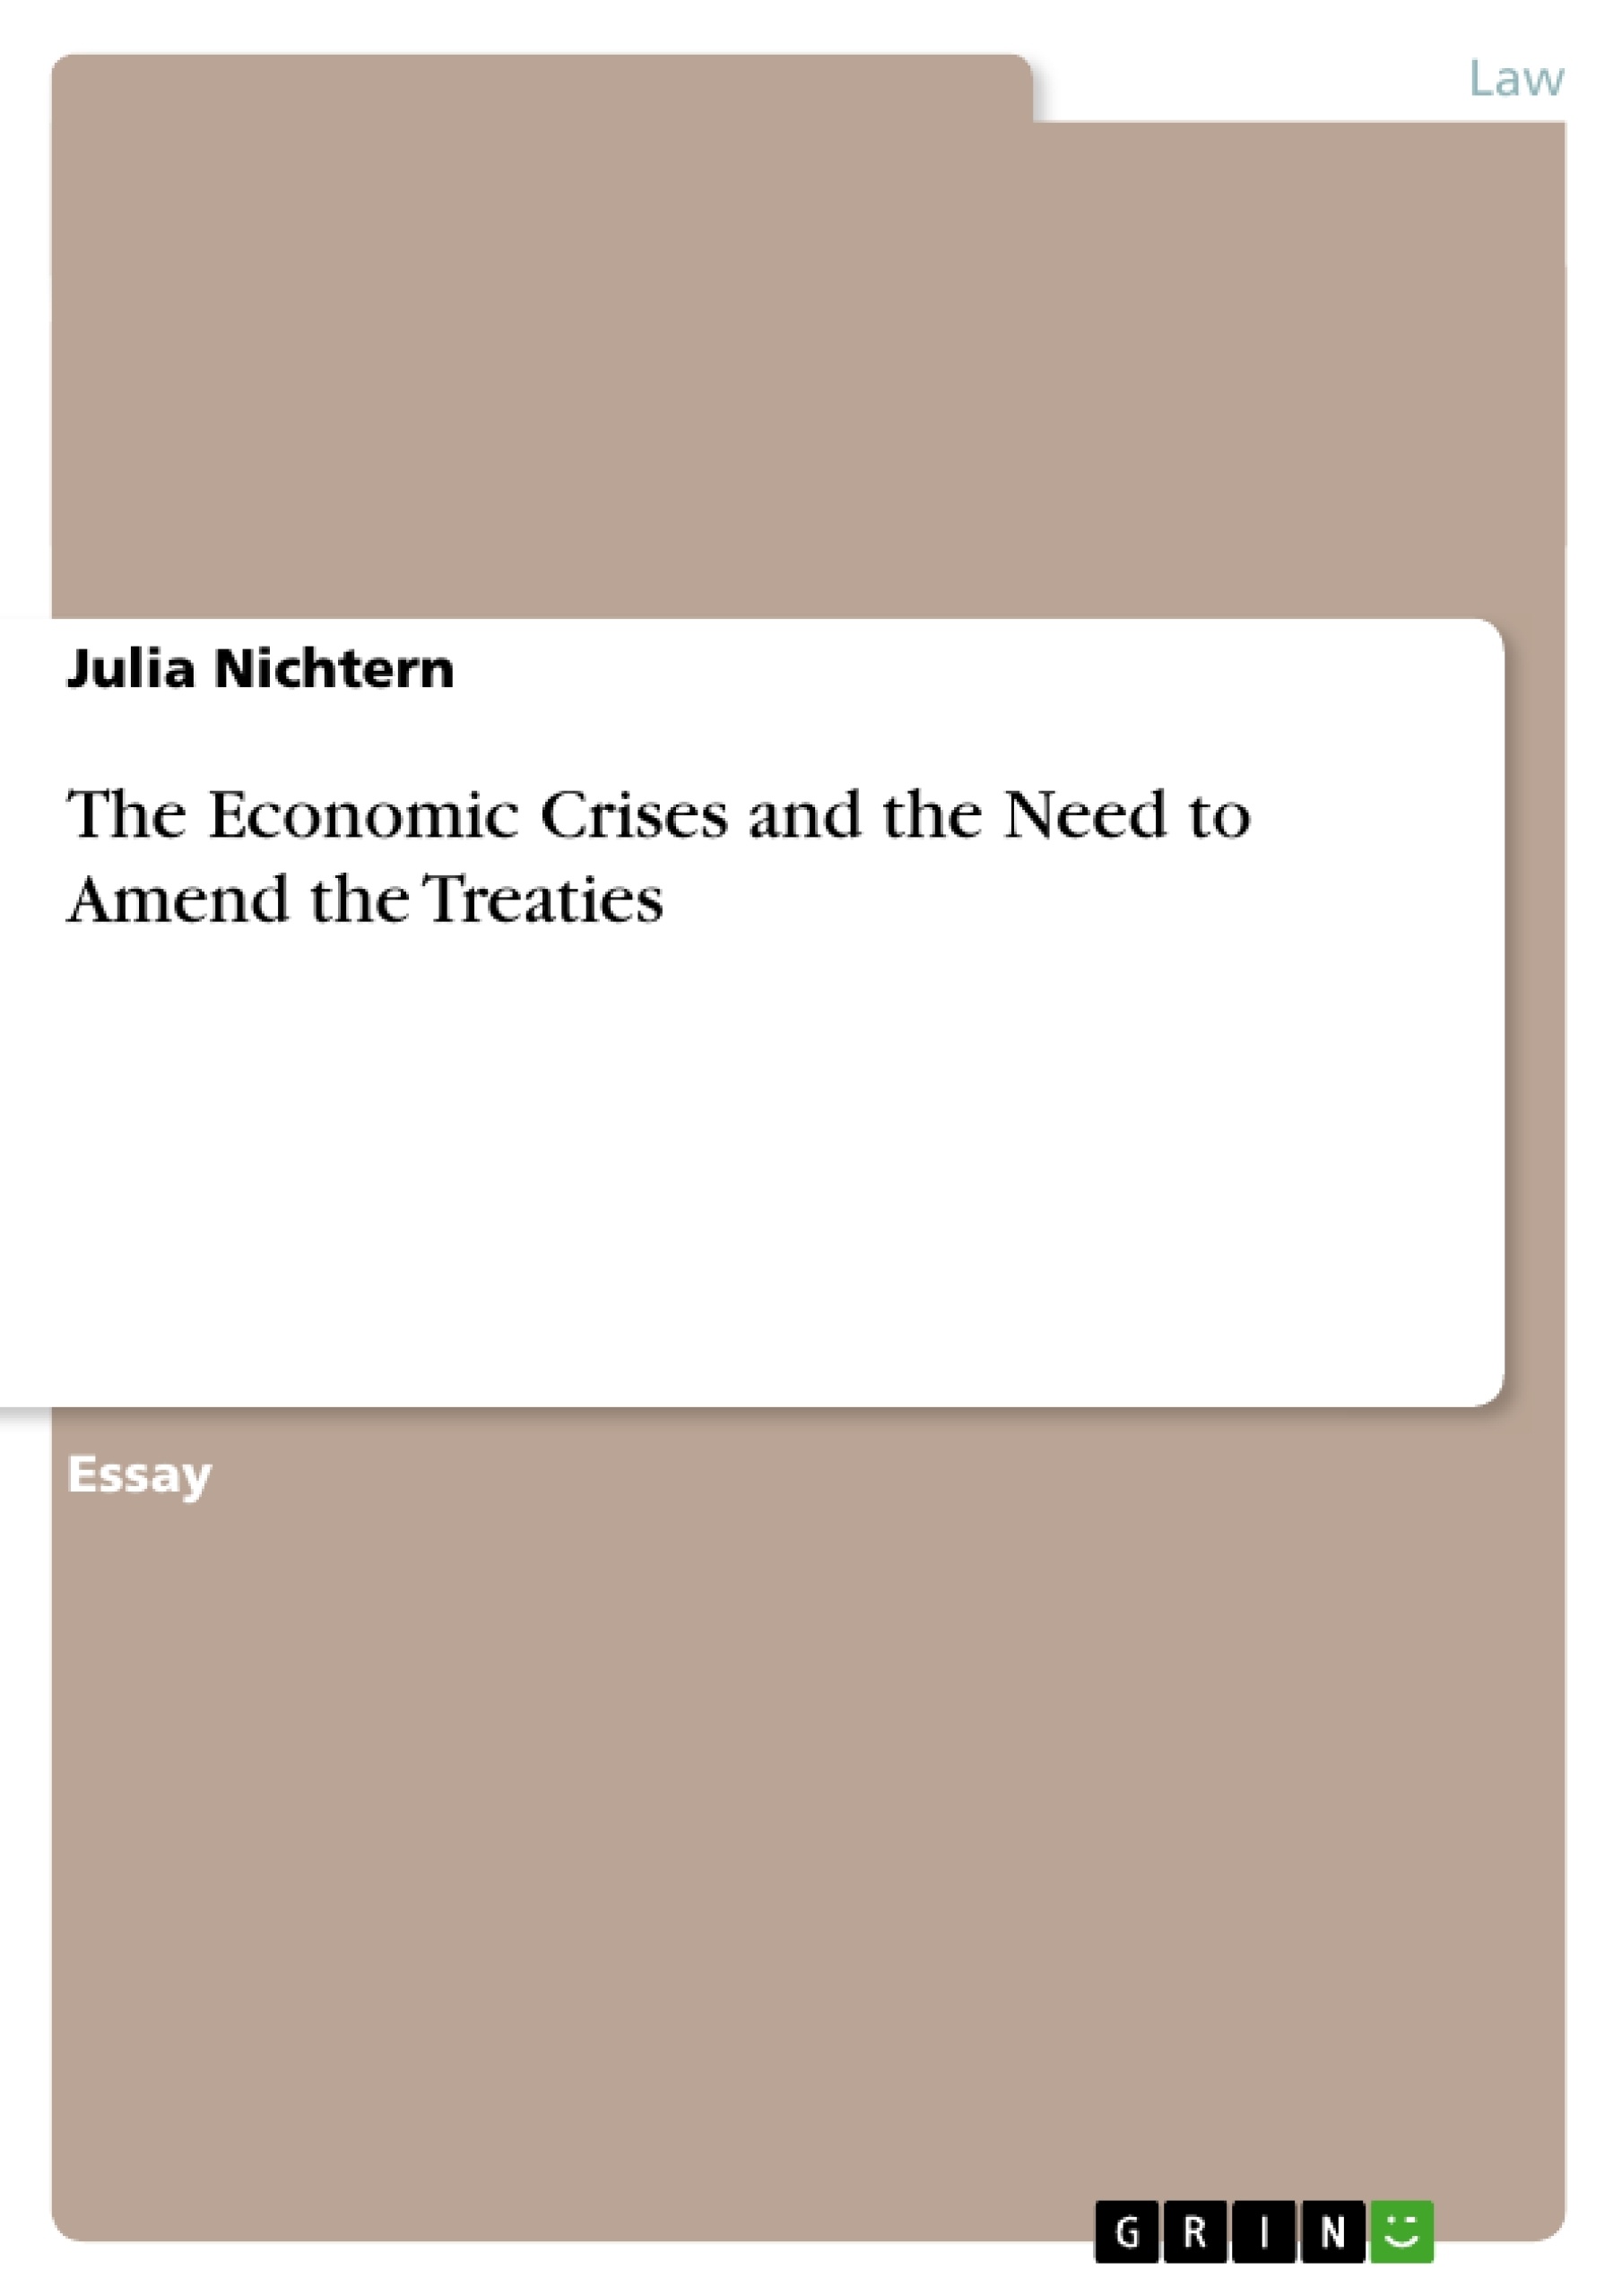 Title: The Economic Crises and the Need to Amend the Treaties